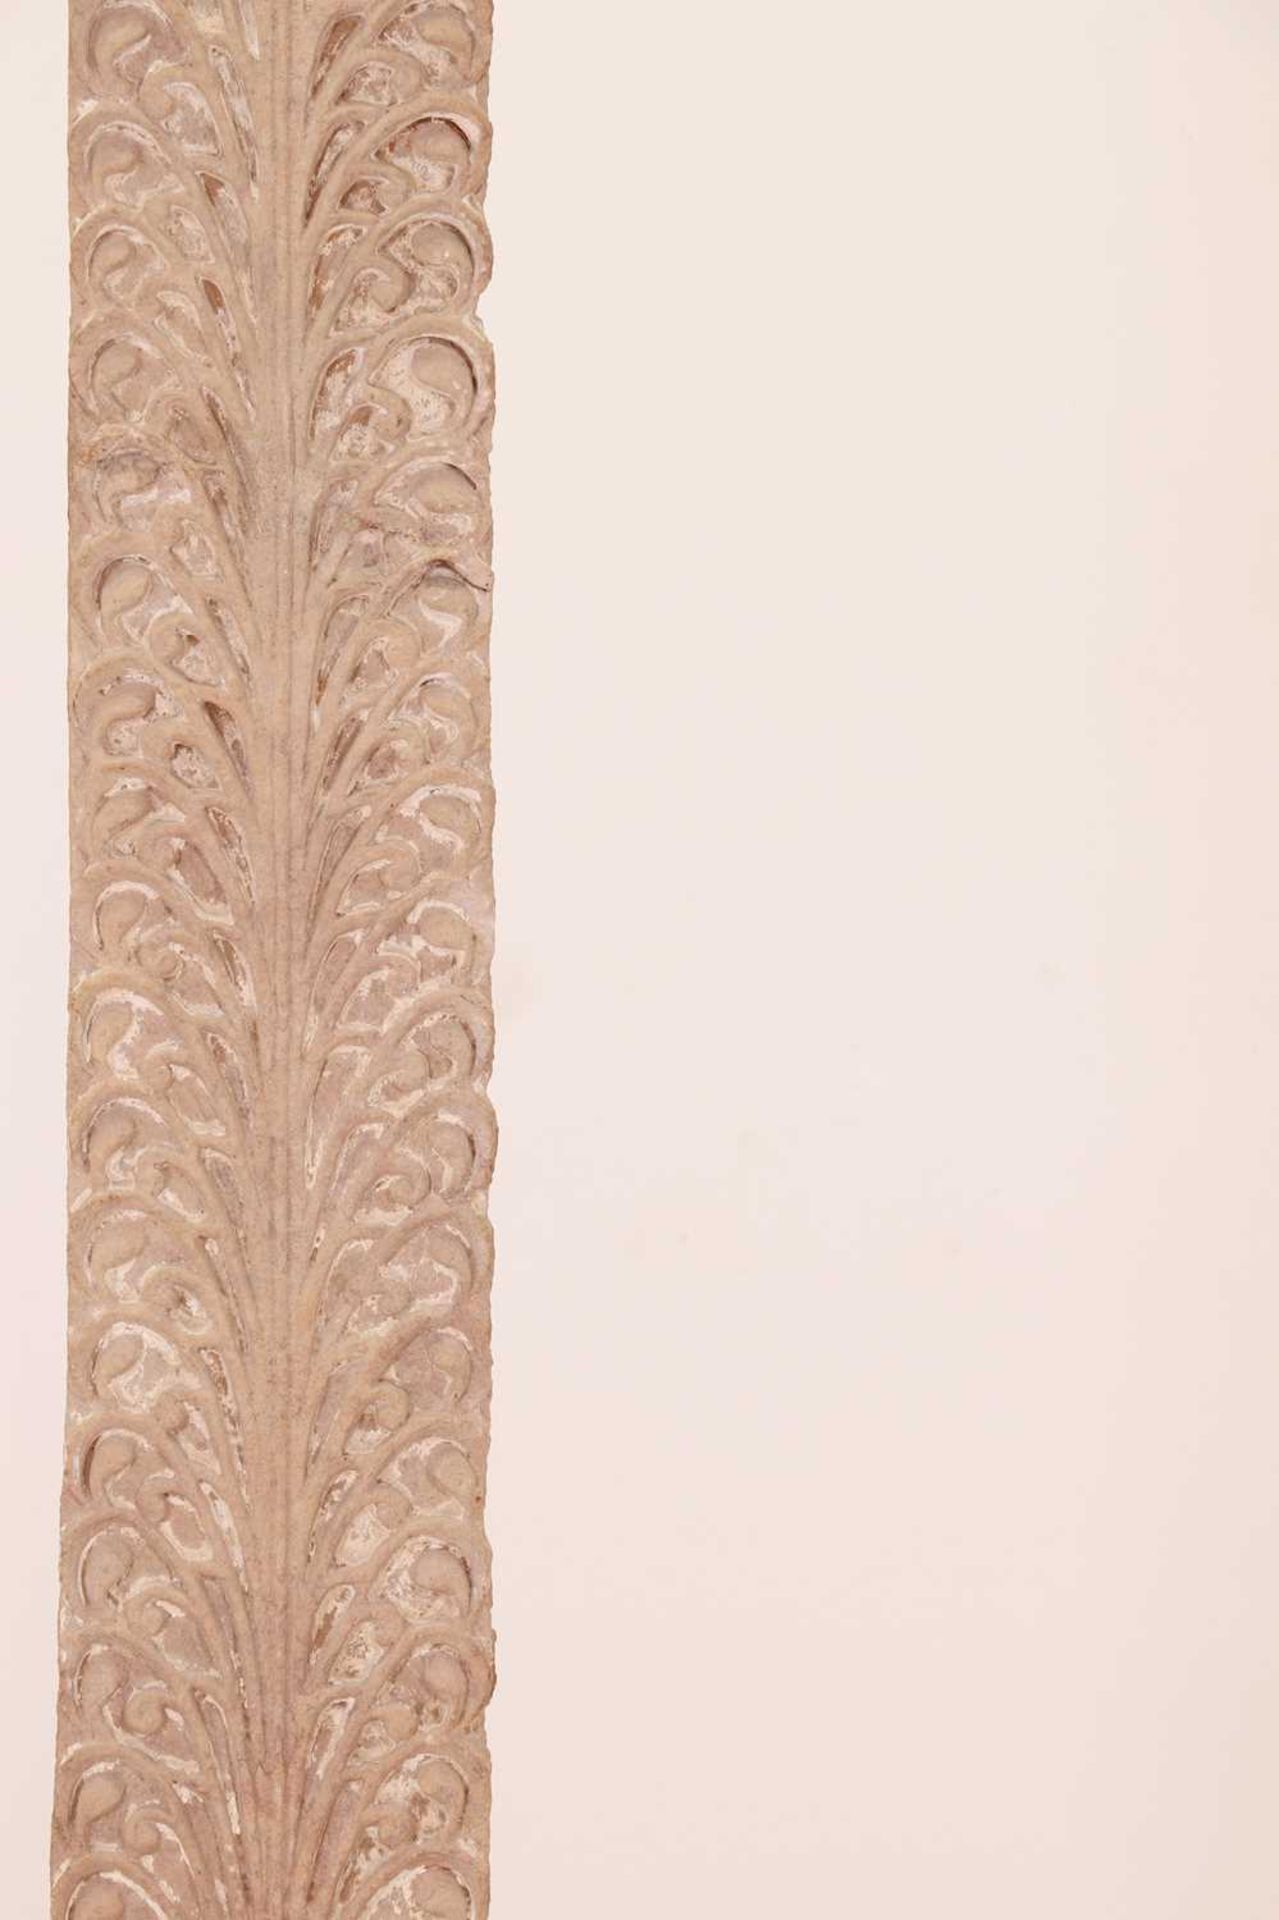 A Mughal red sandstone pilaster - Image 2 of 7